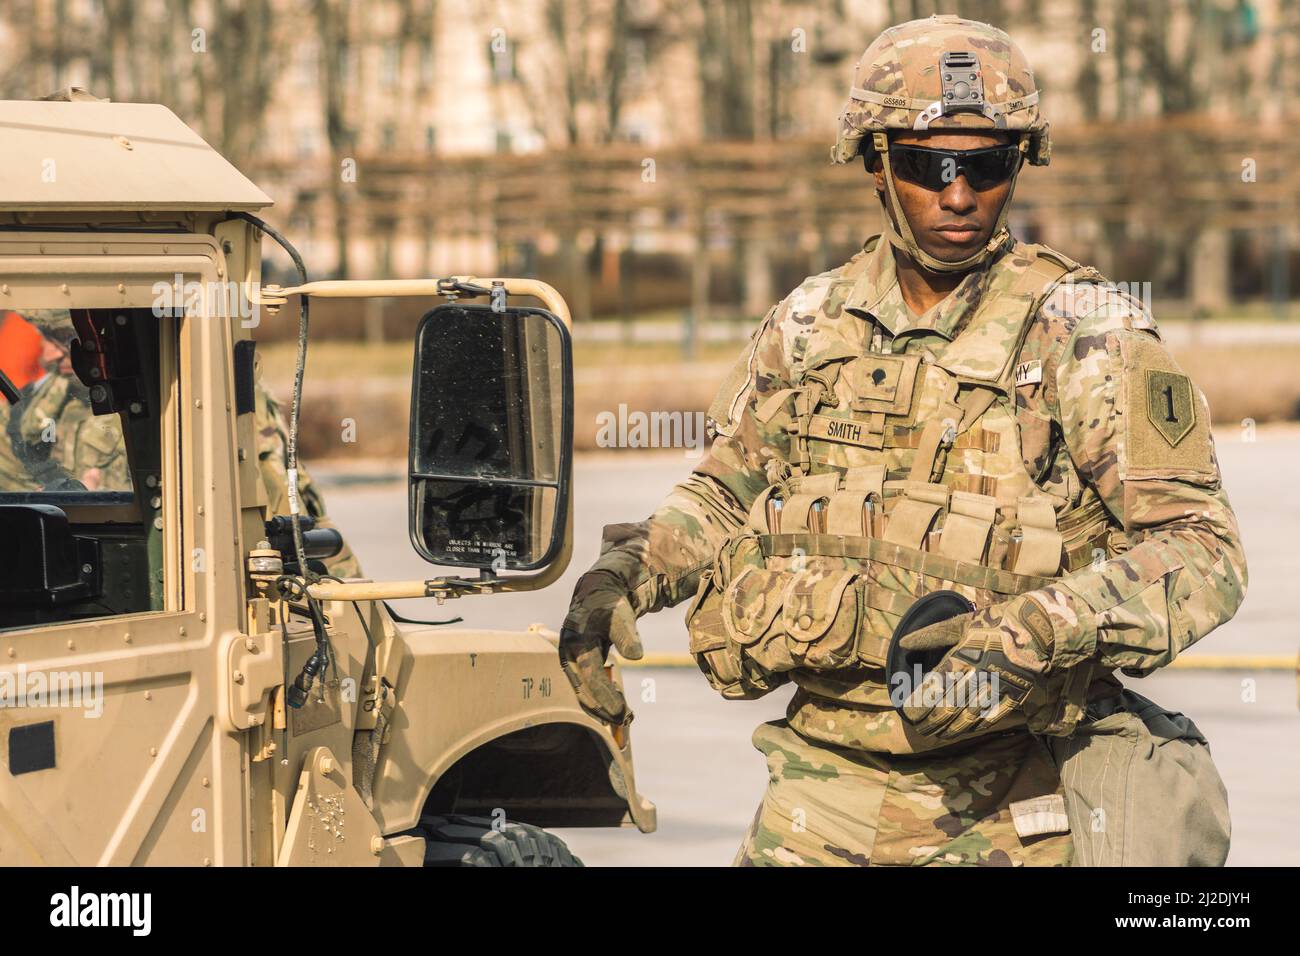 African American United States Marine Corps soldier with sunglasses, shotgun or rifle and armored vehicle humvee, USA or US army troops ready for war Stock Photo